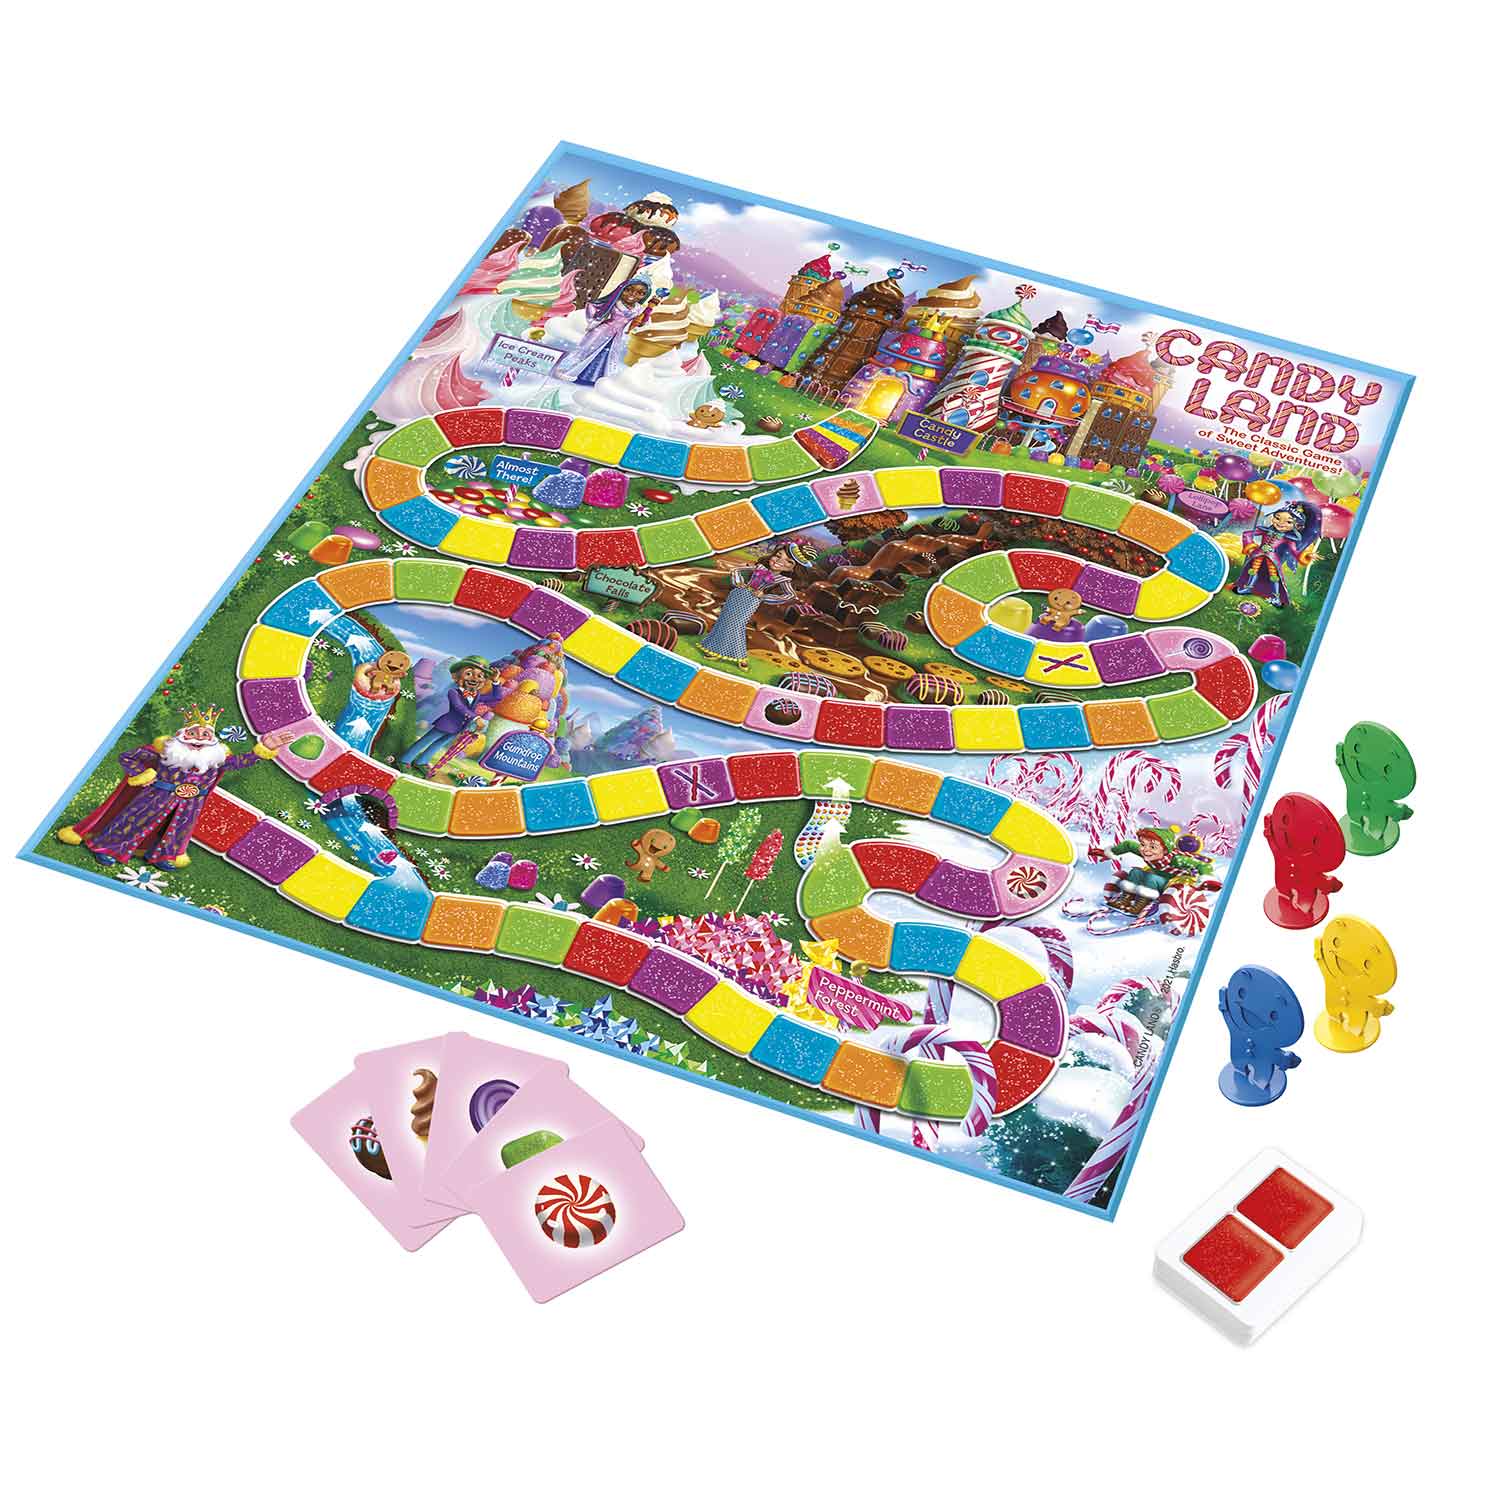 candy land board game with cars